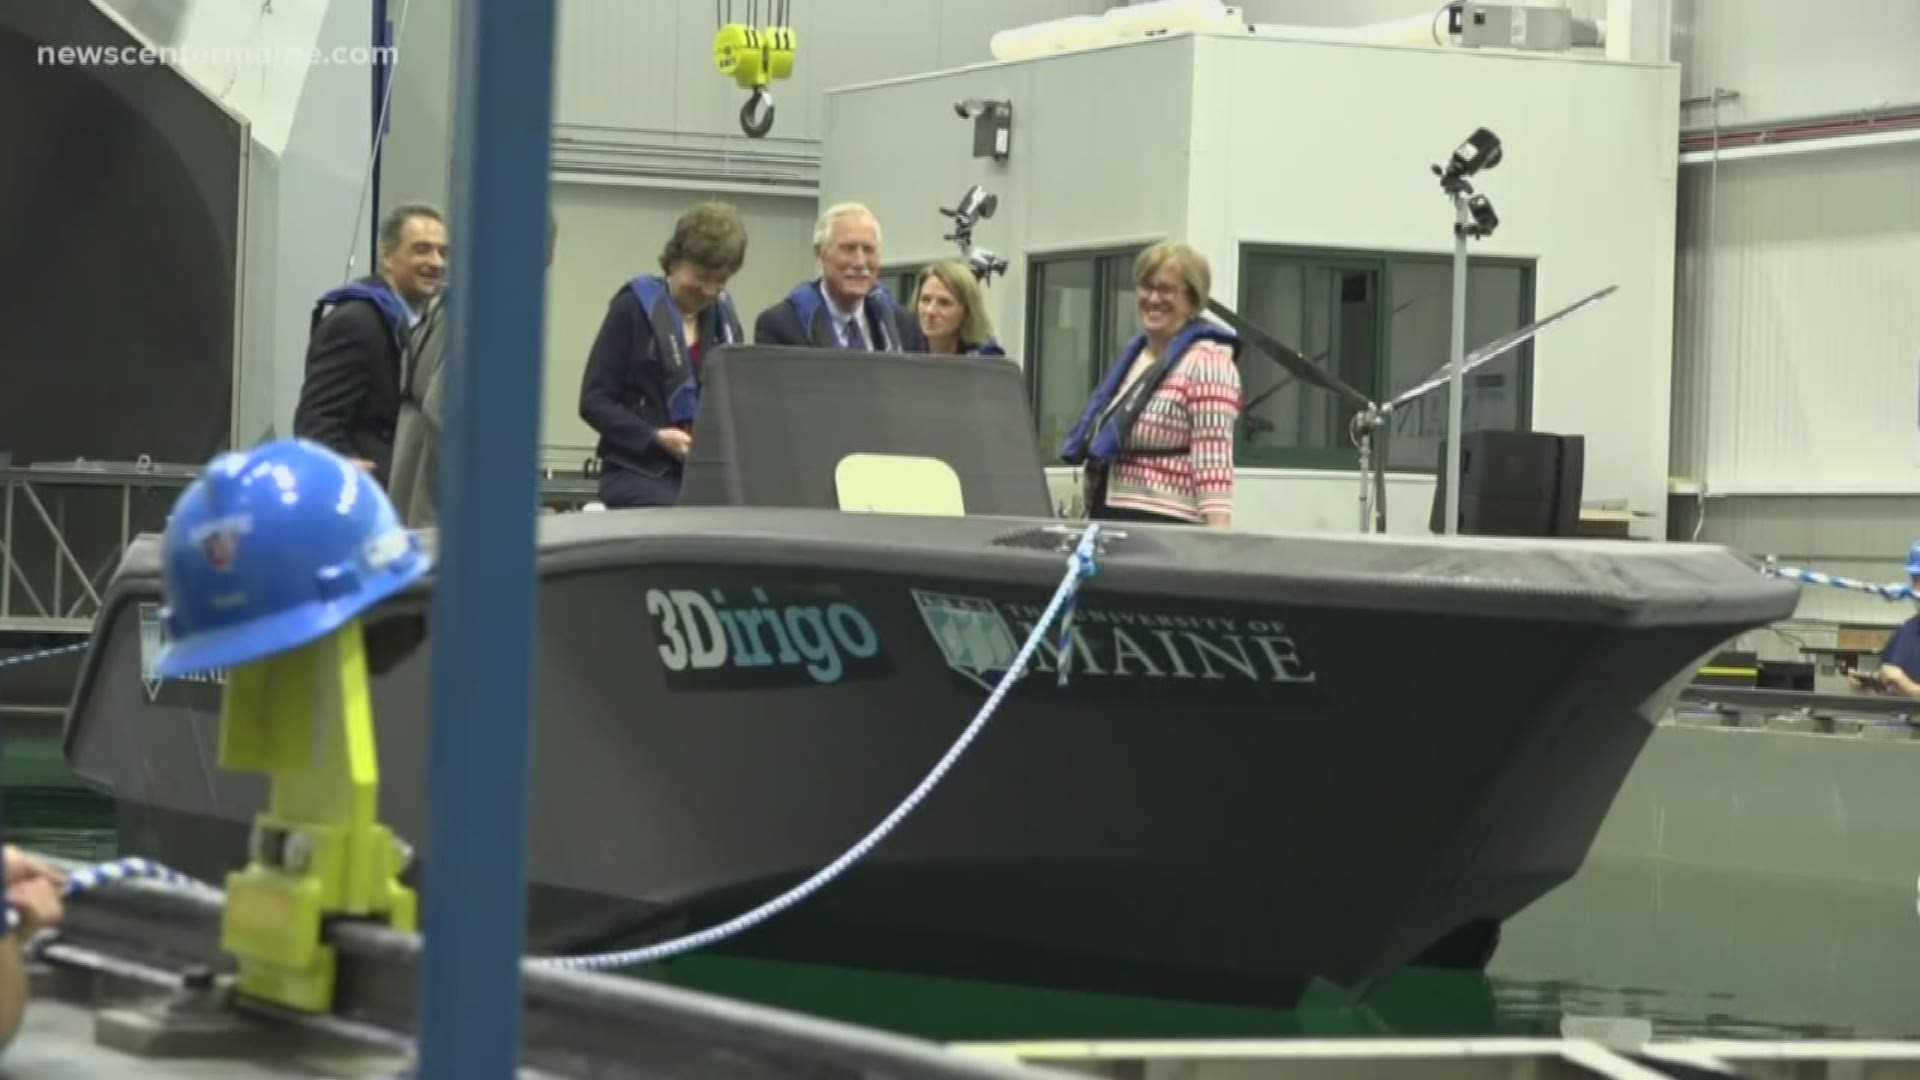 History is made today at the University of Maine.
And the folks from Guiness World Records... there to see it happen. A boat made by a 3 D printer.